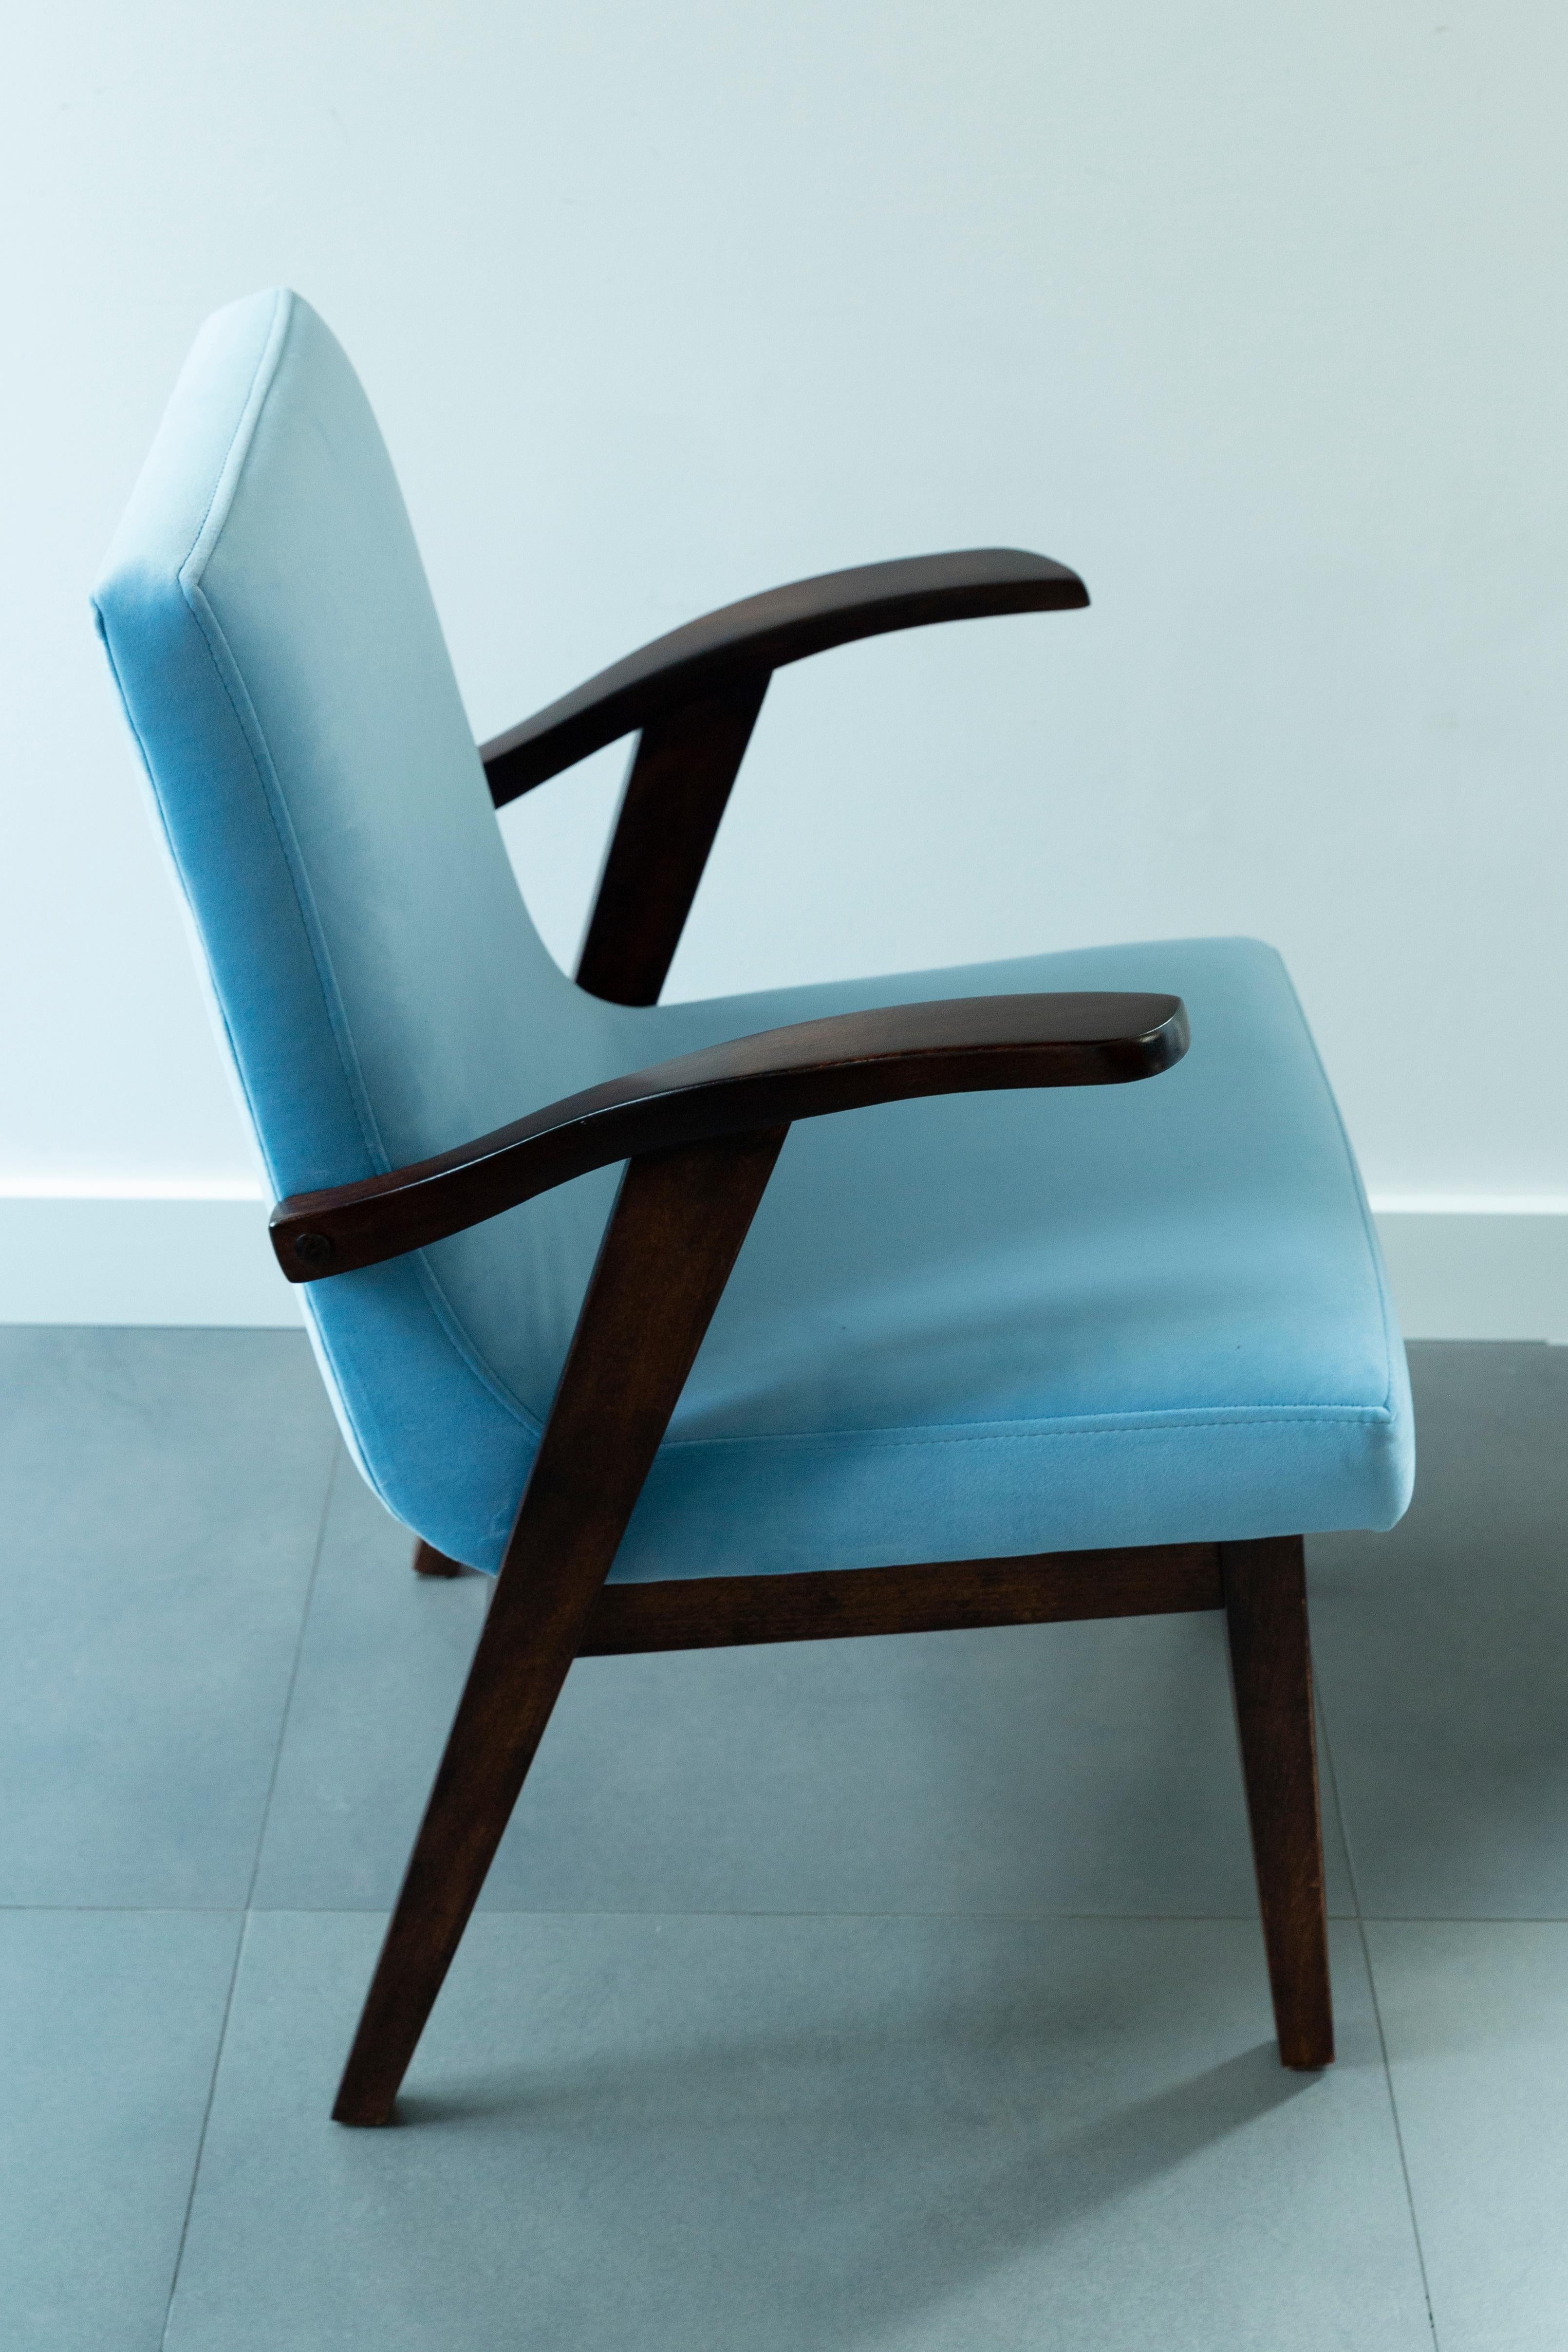 Armchair designed by Mieczyslaw Puchala. Dark brown wood combined with a baby blue beautiful velvet gives it elegance and nobility. The chair has undergone a full carpentry and upholstery renovation. The wood is in excellent condition after full